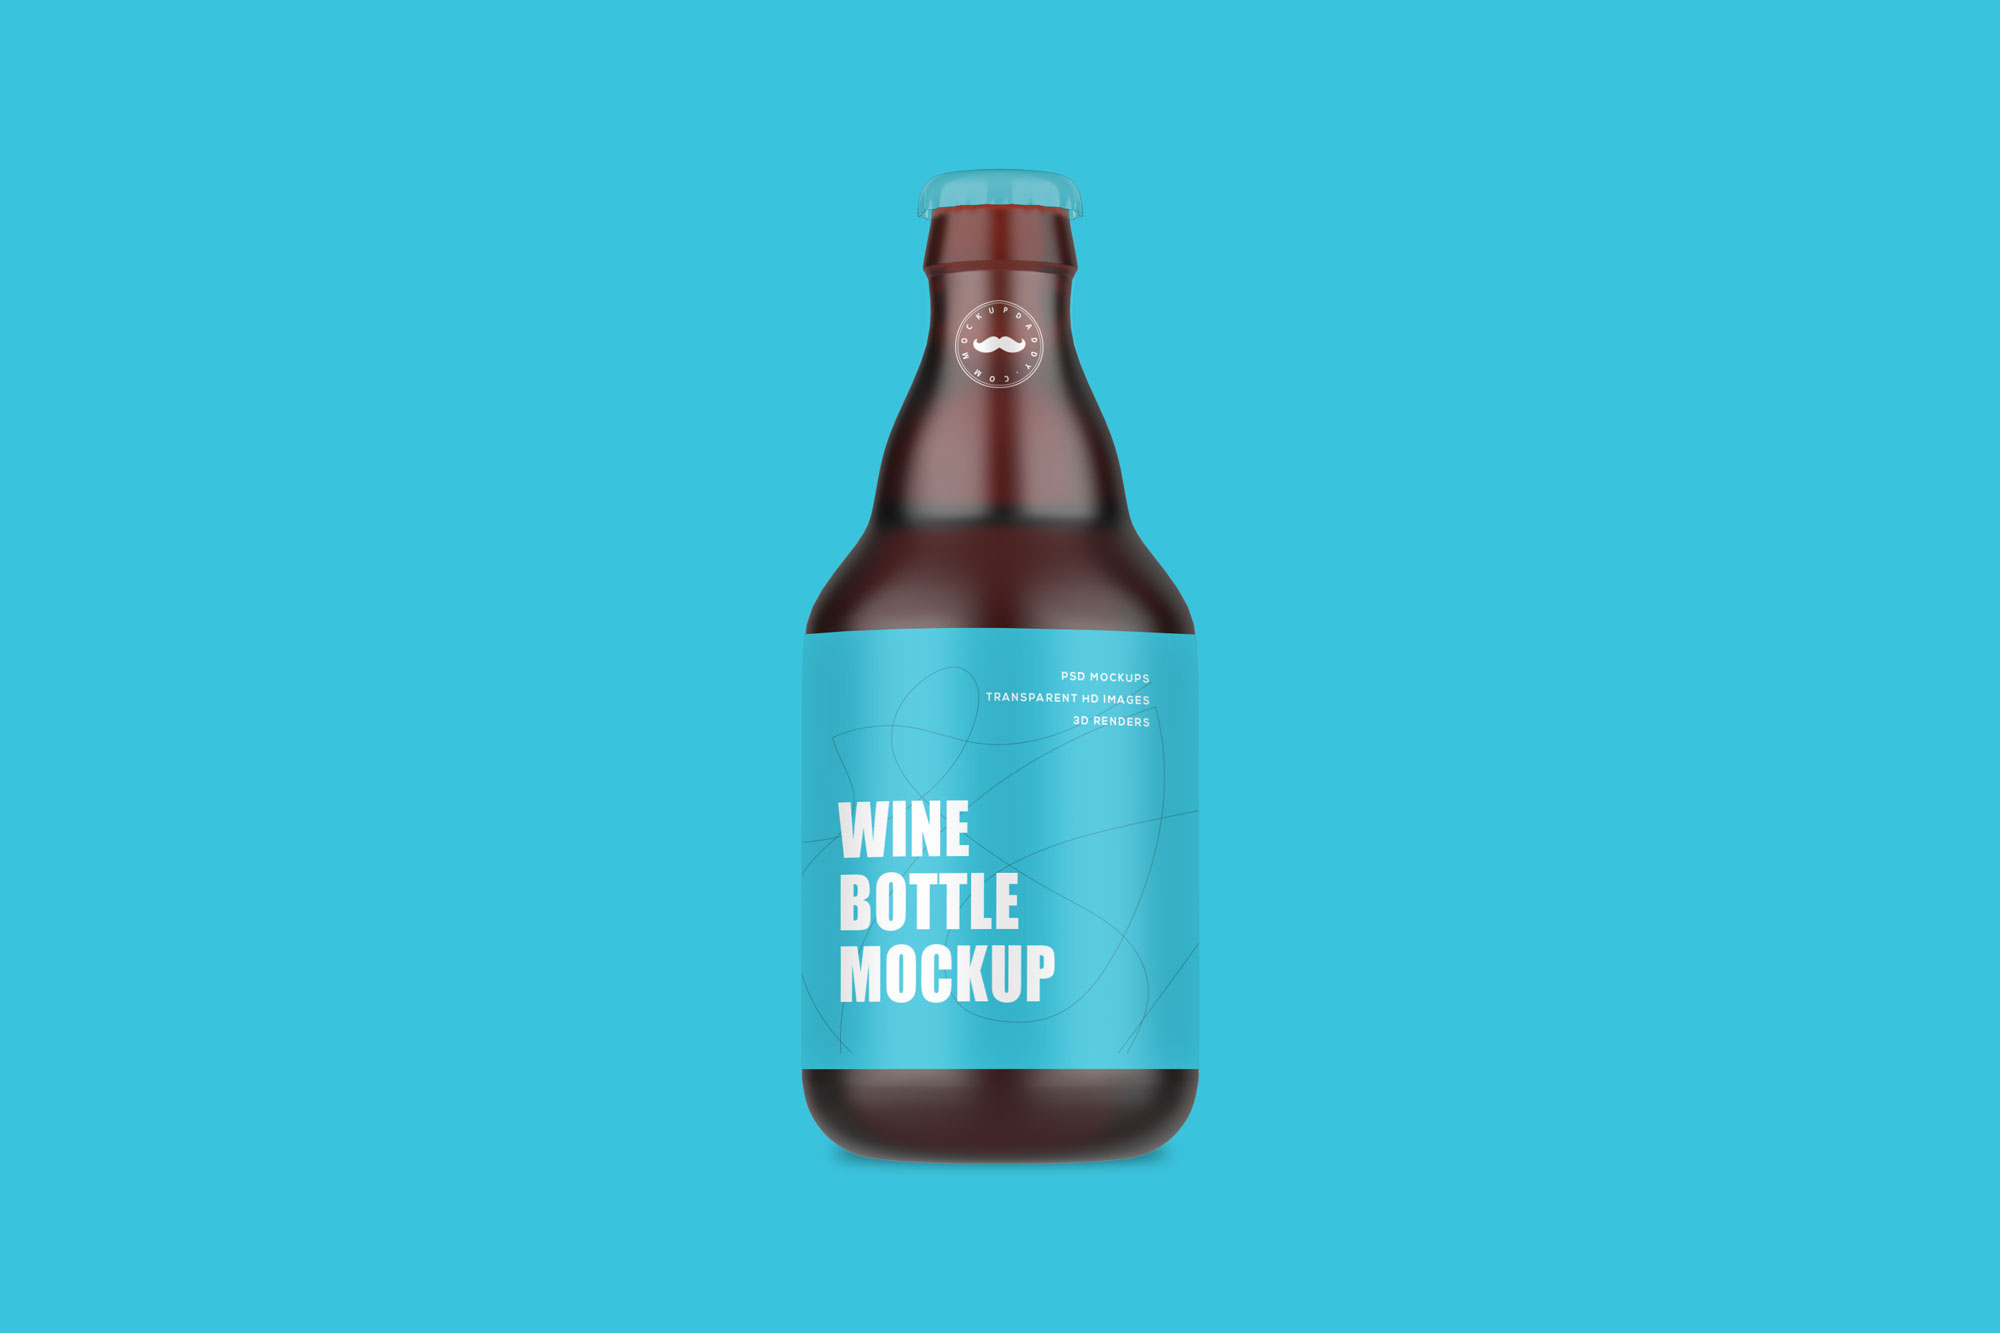 Black Amber Frosted Beer Bottle Mockup with blue label and cap.